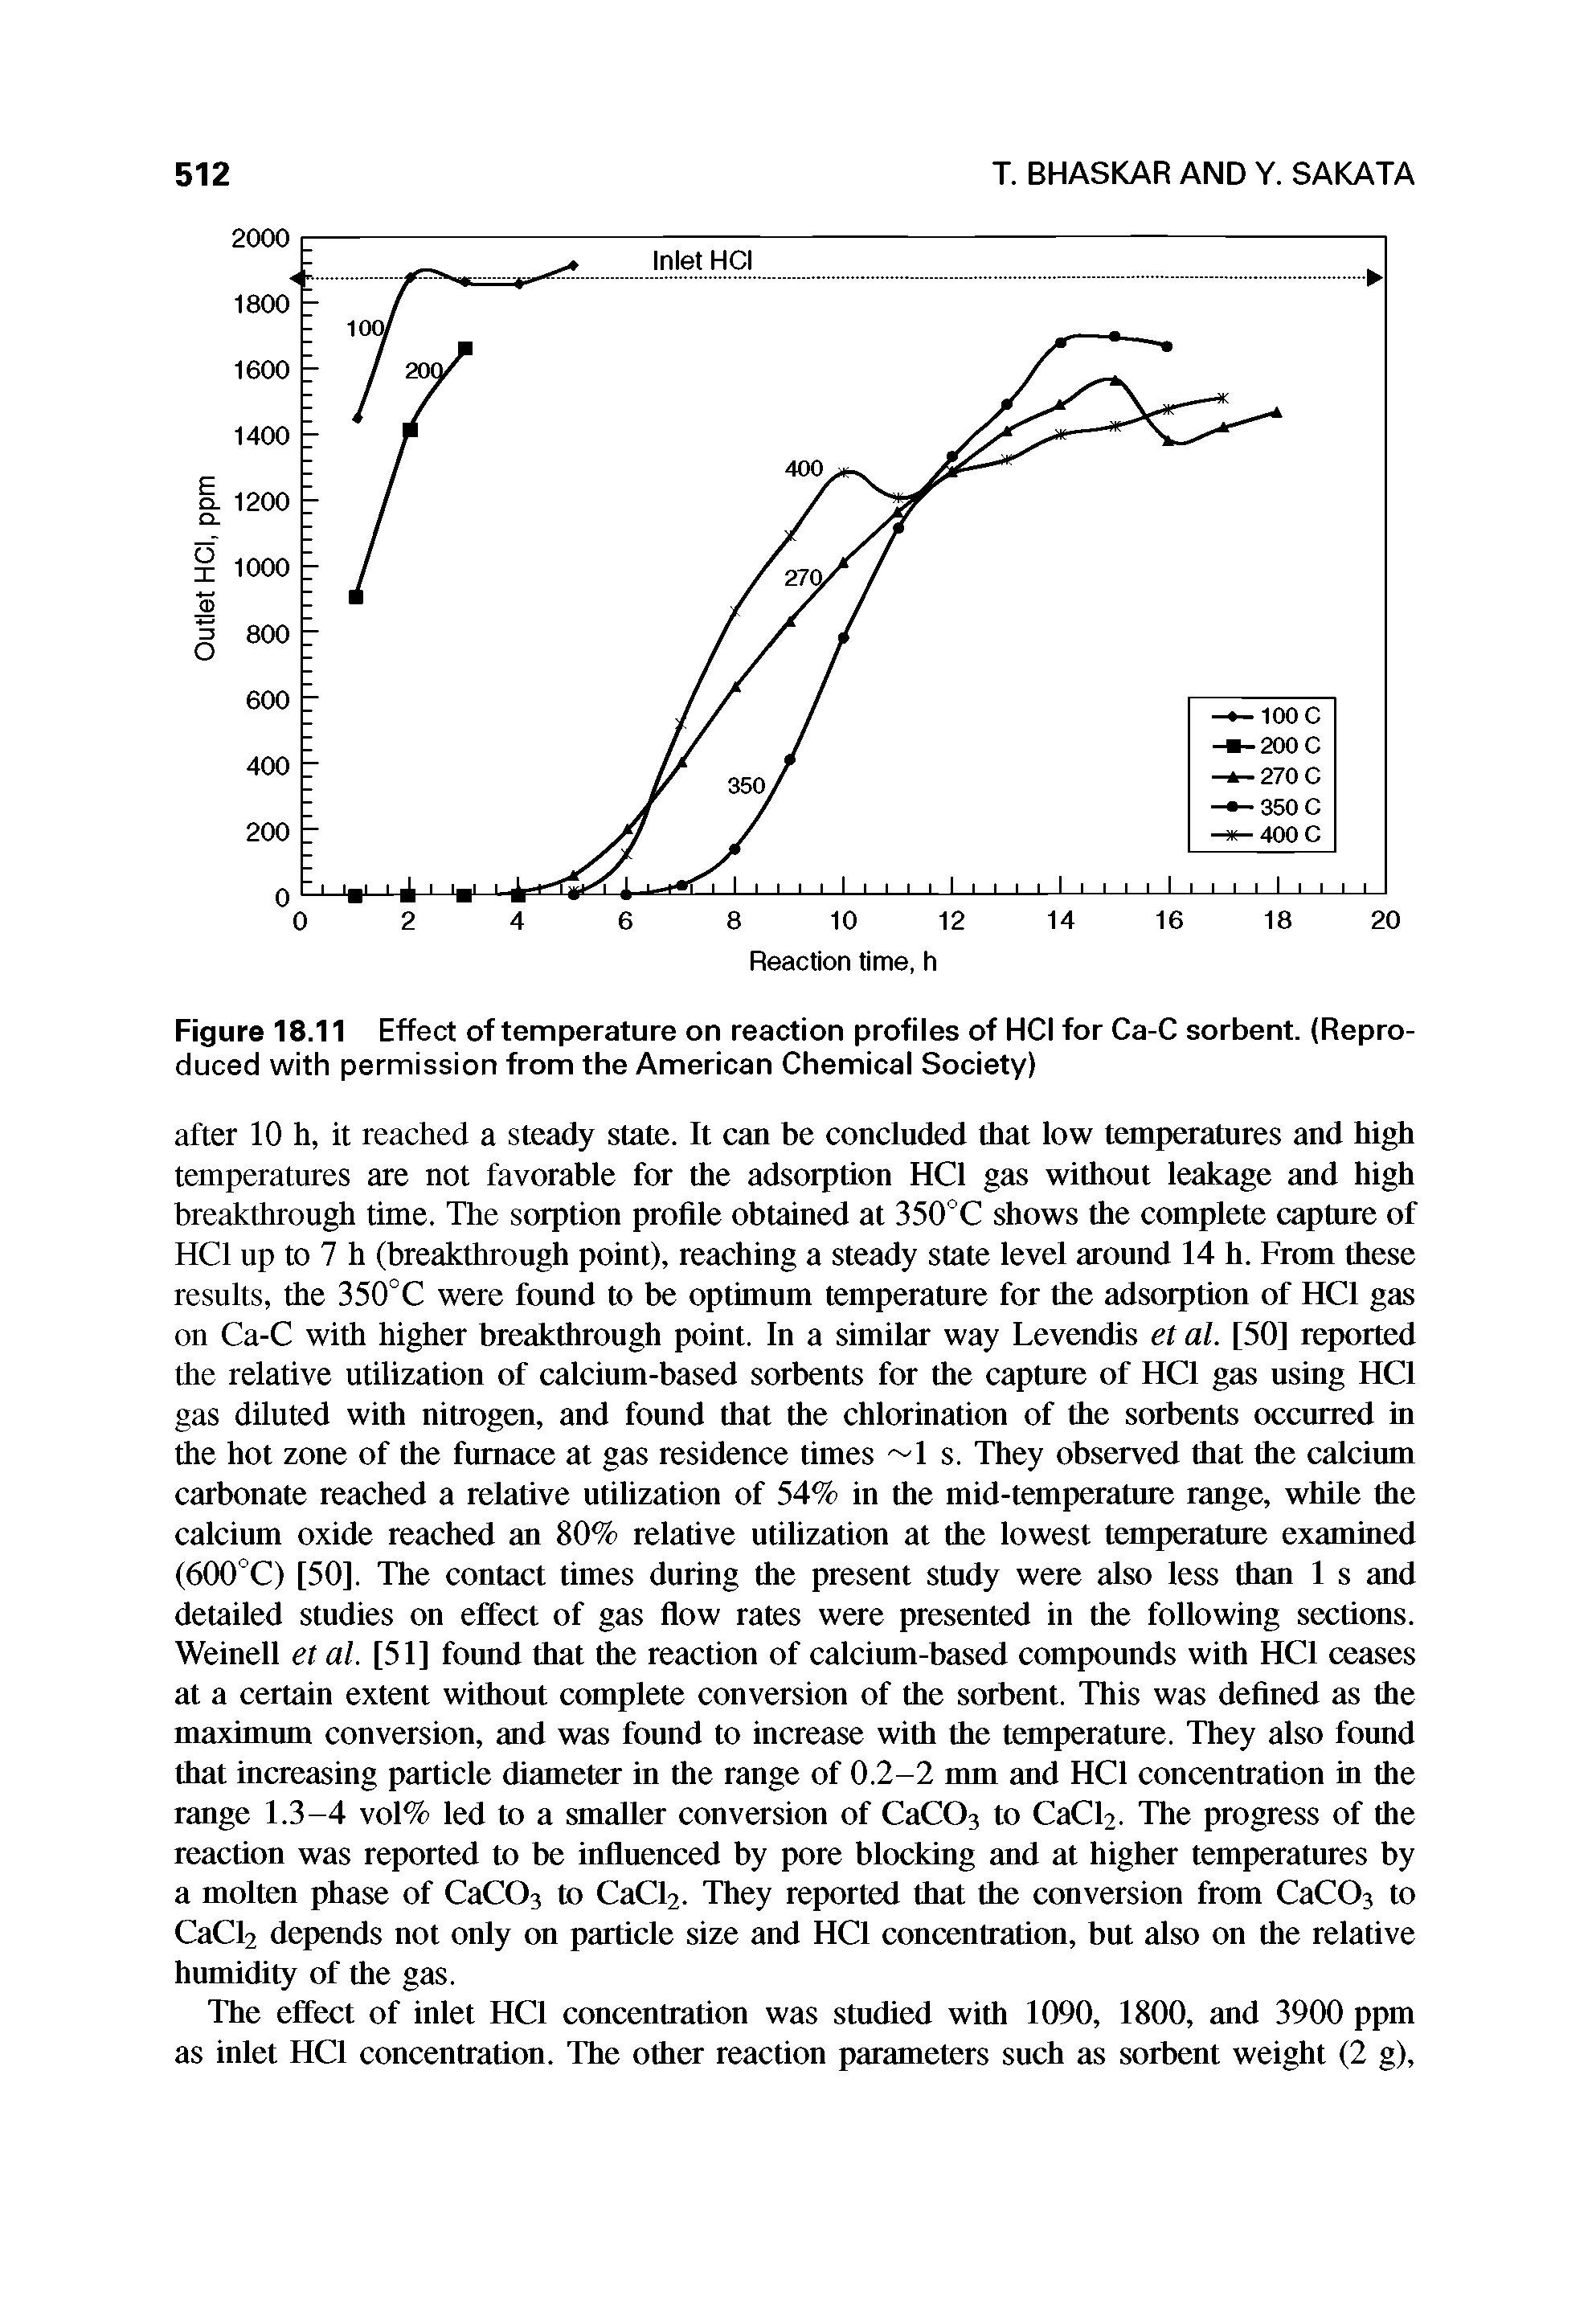 Figure 18.11 Effect of temperature on reaction profiles of HCI for Ca-C sorbent. (Reproduced with permission from the American Chemical Society)...